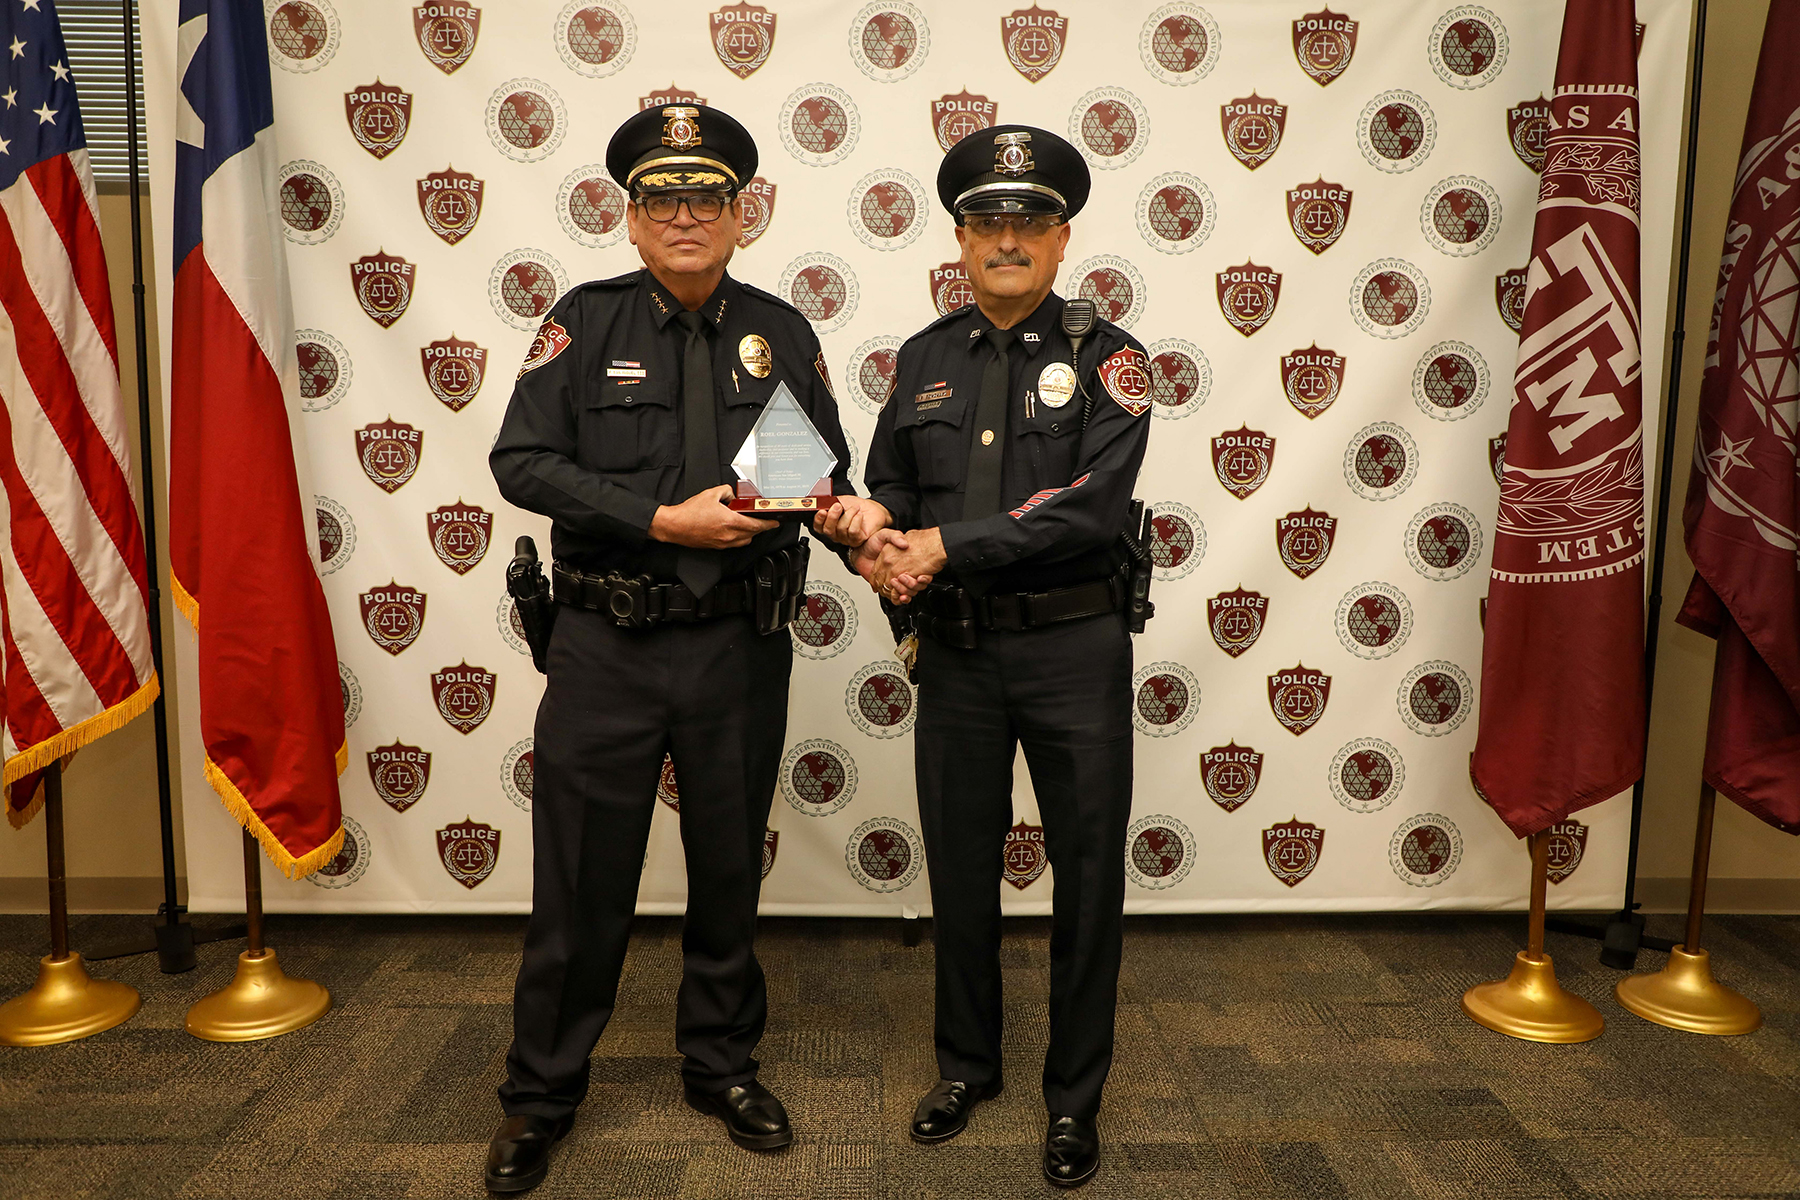 Chief San Miguel and Retiree Roel González